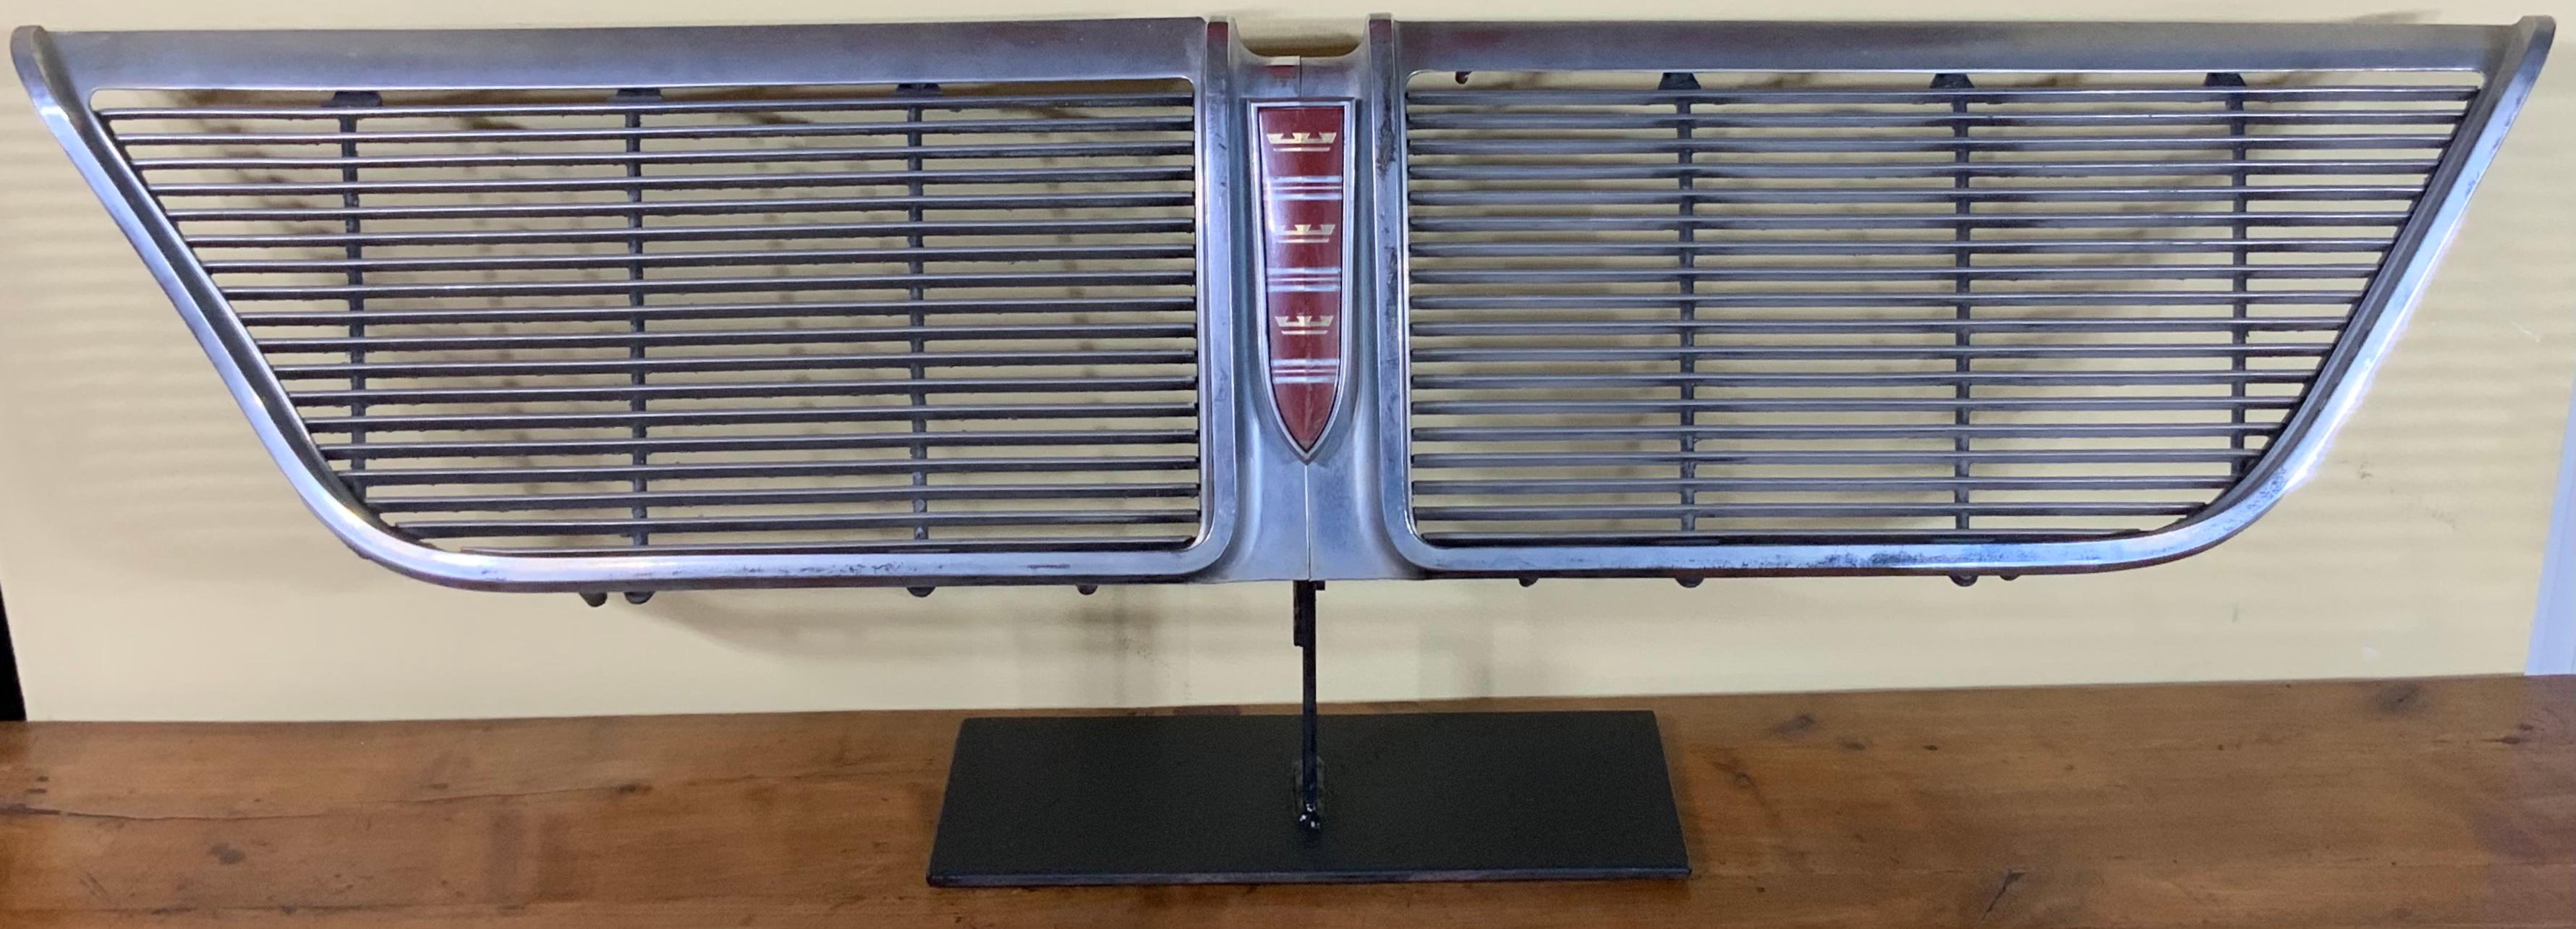 Original 1964 New Yorker Car Grill on Display For Sale 5